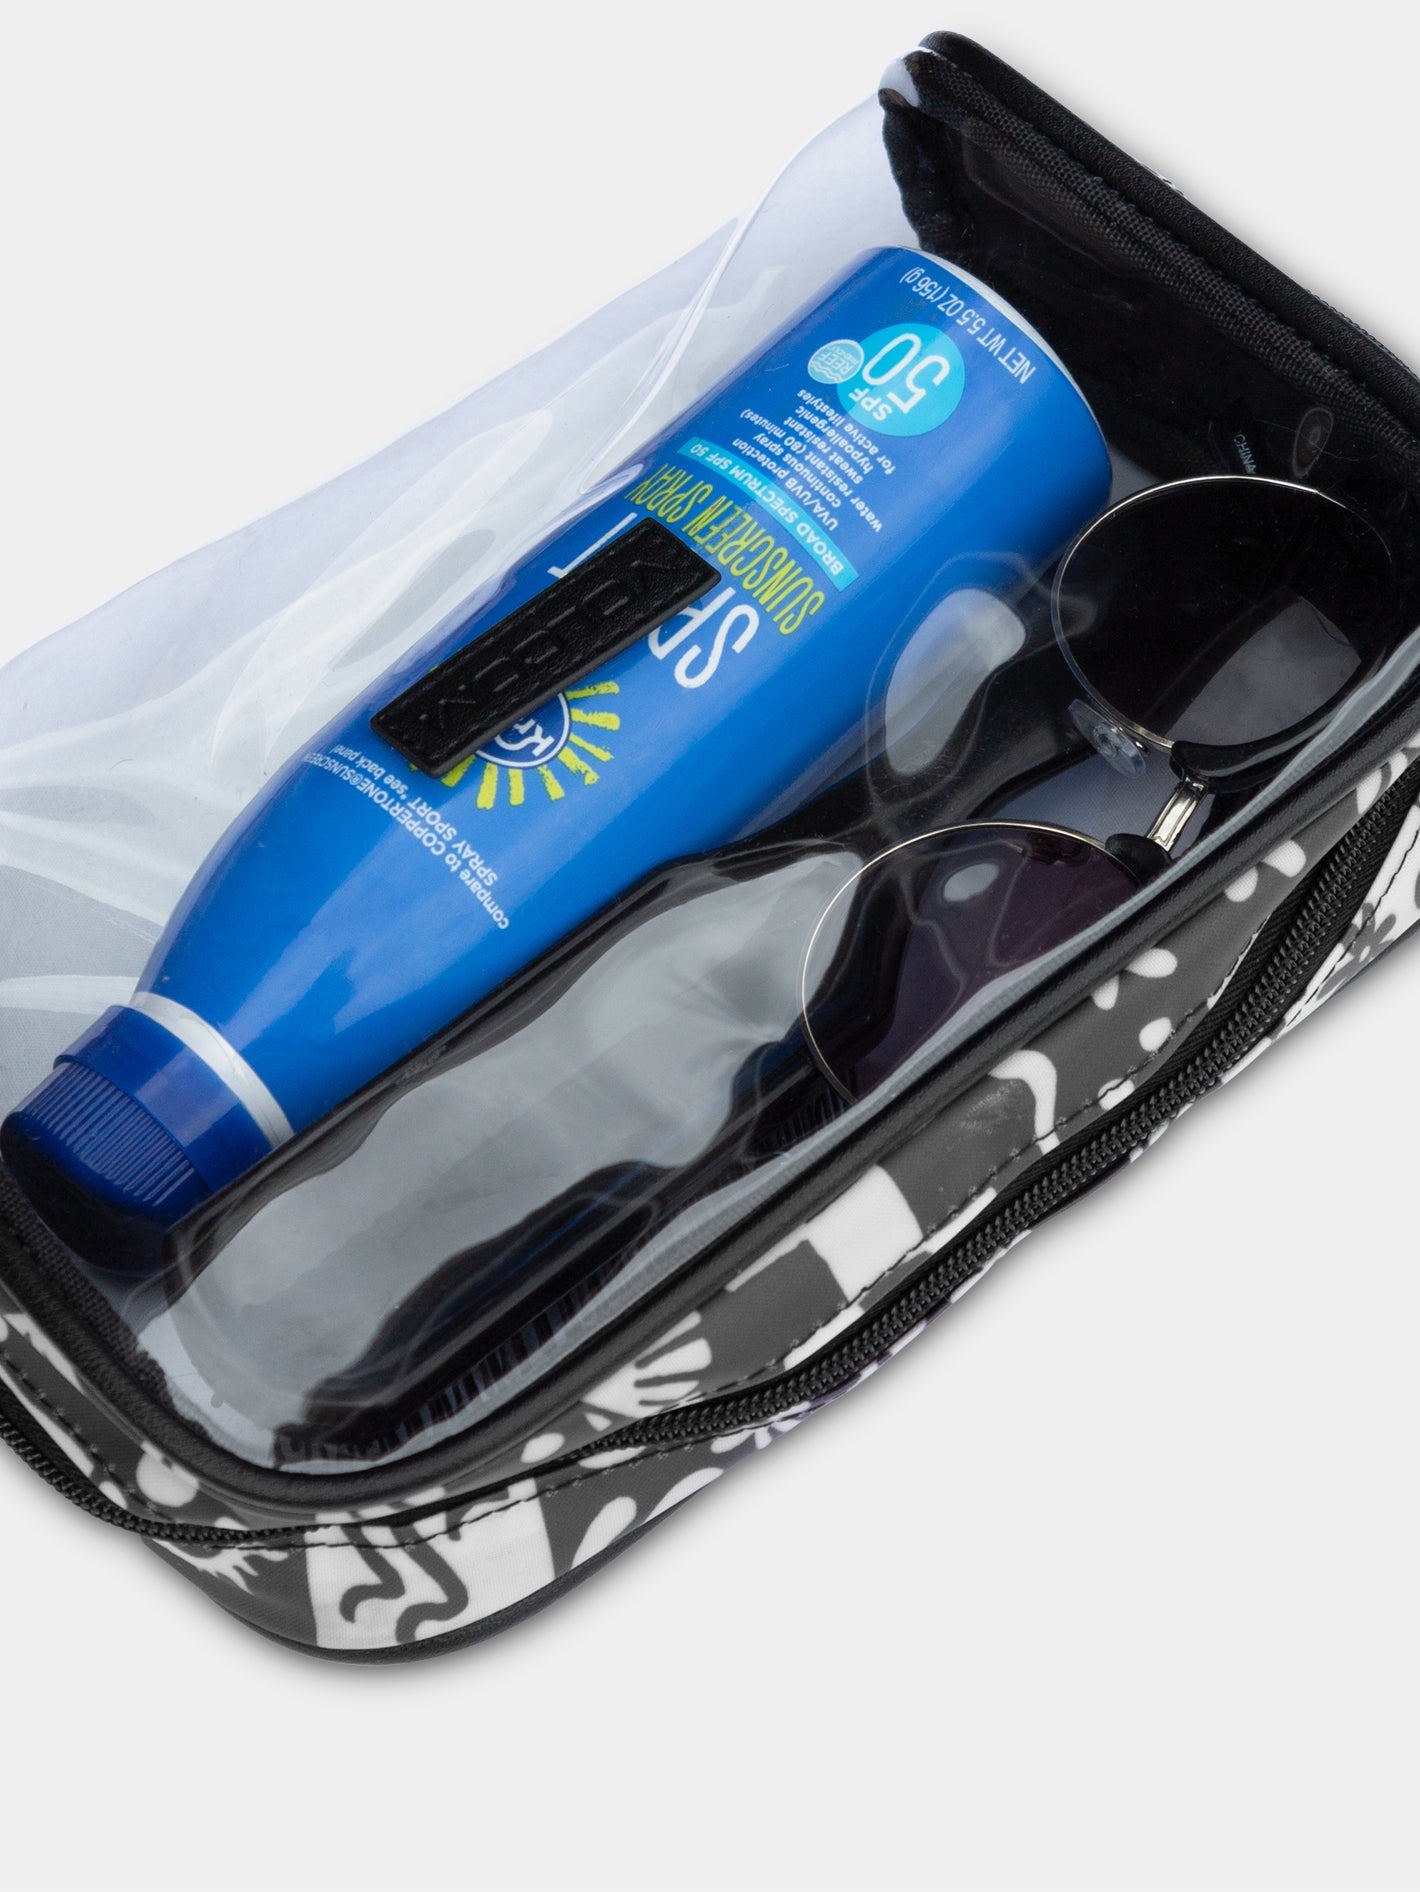 Clearly Sunscreen Pouch - Black